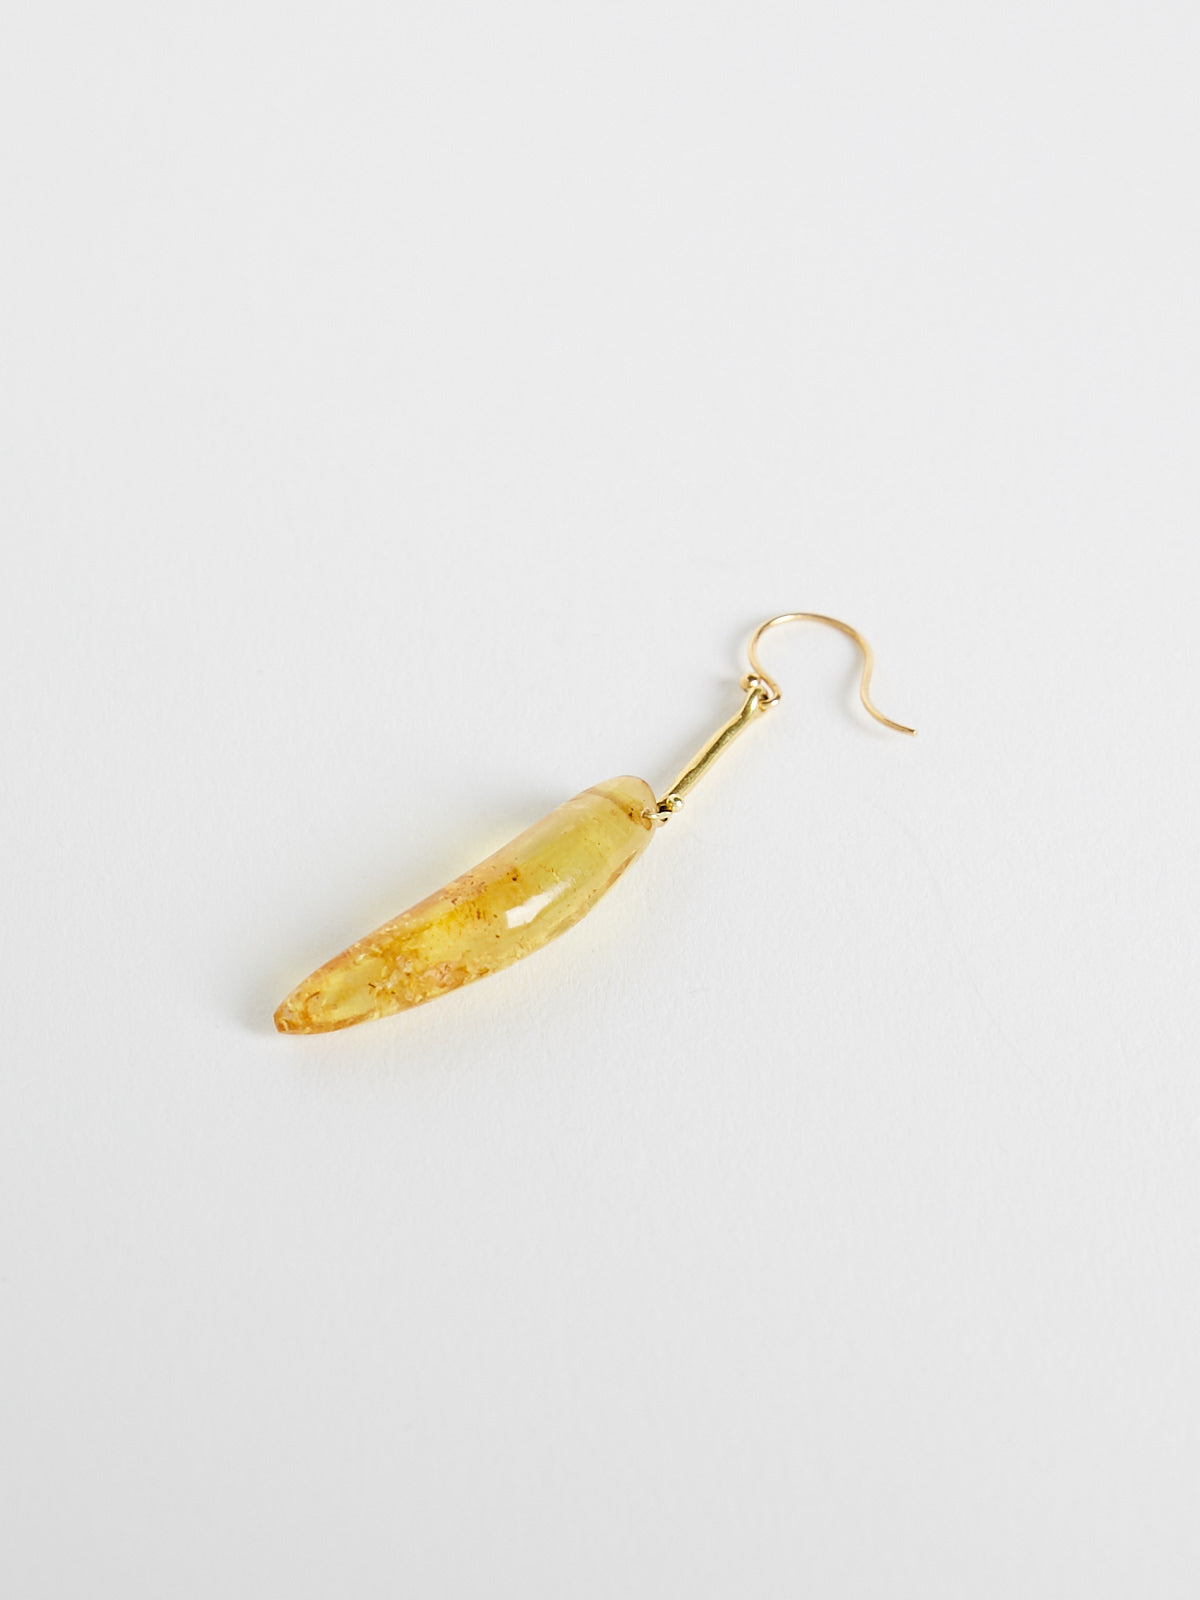 Ten Thousand Things - Earrings in 18k Yellow Gold with Hand Cut